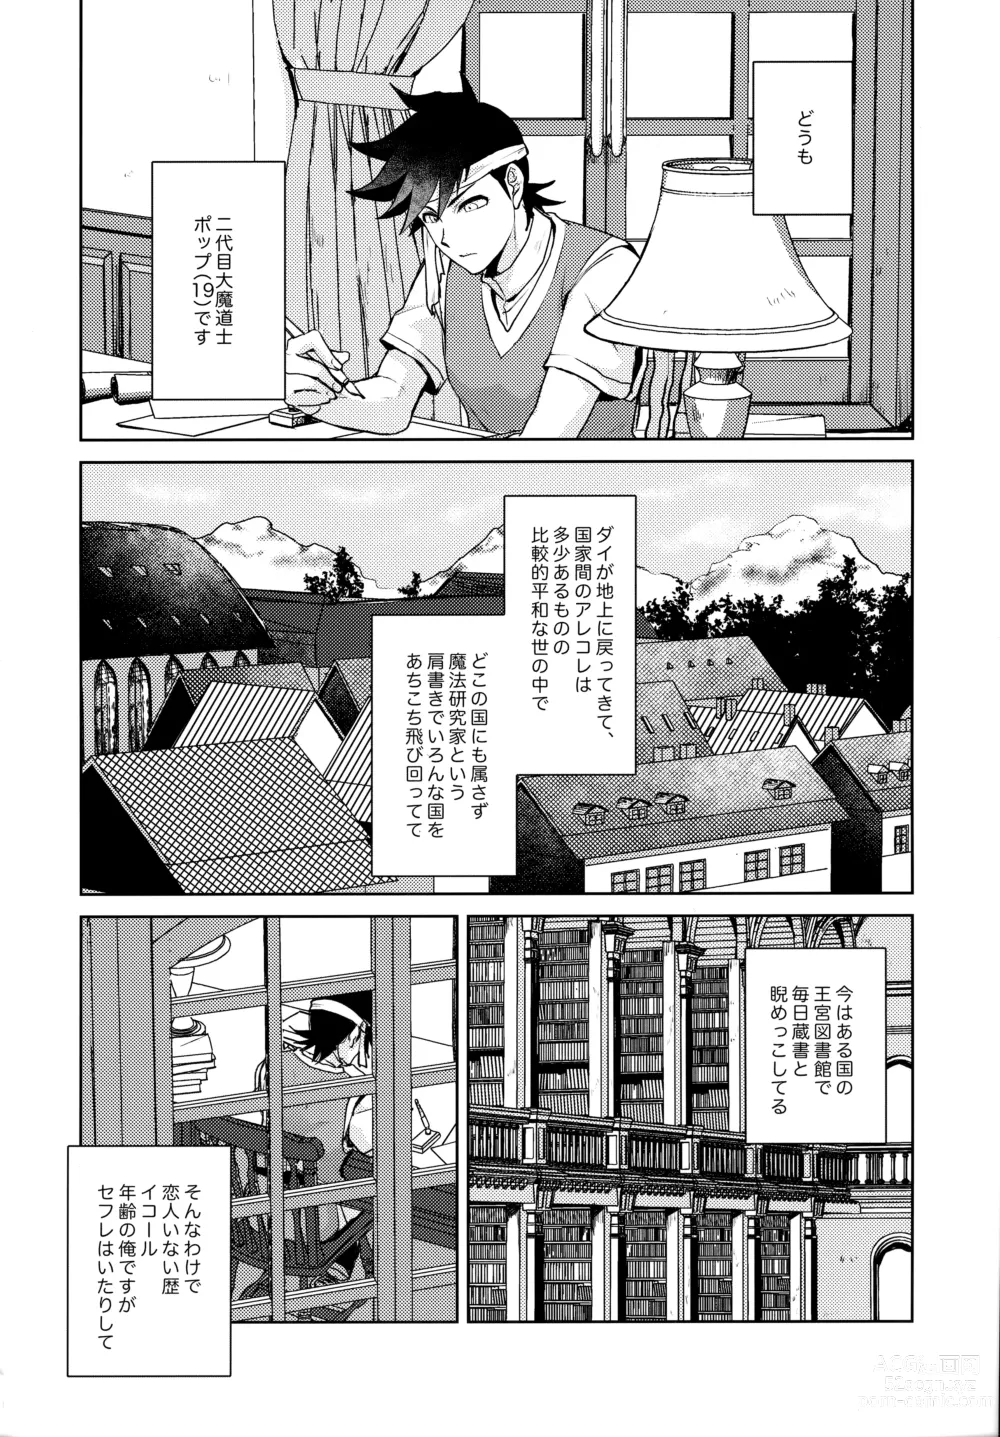 Page 3 of doujinshi You Complete Me!